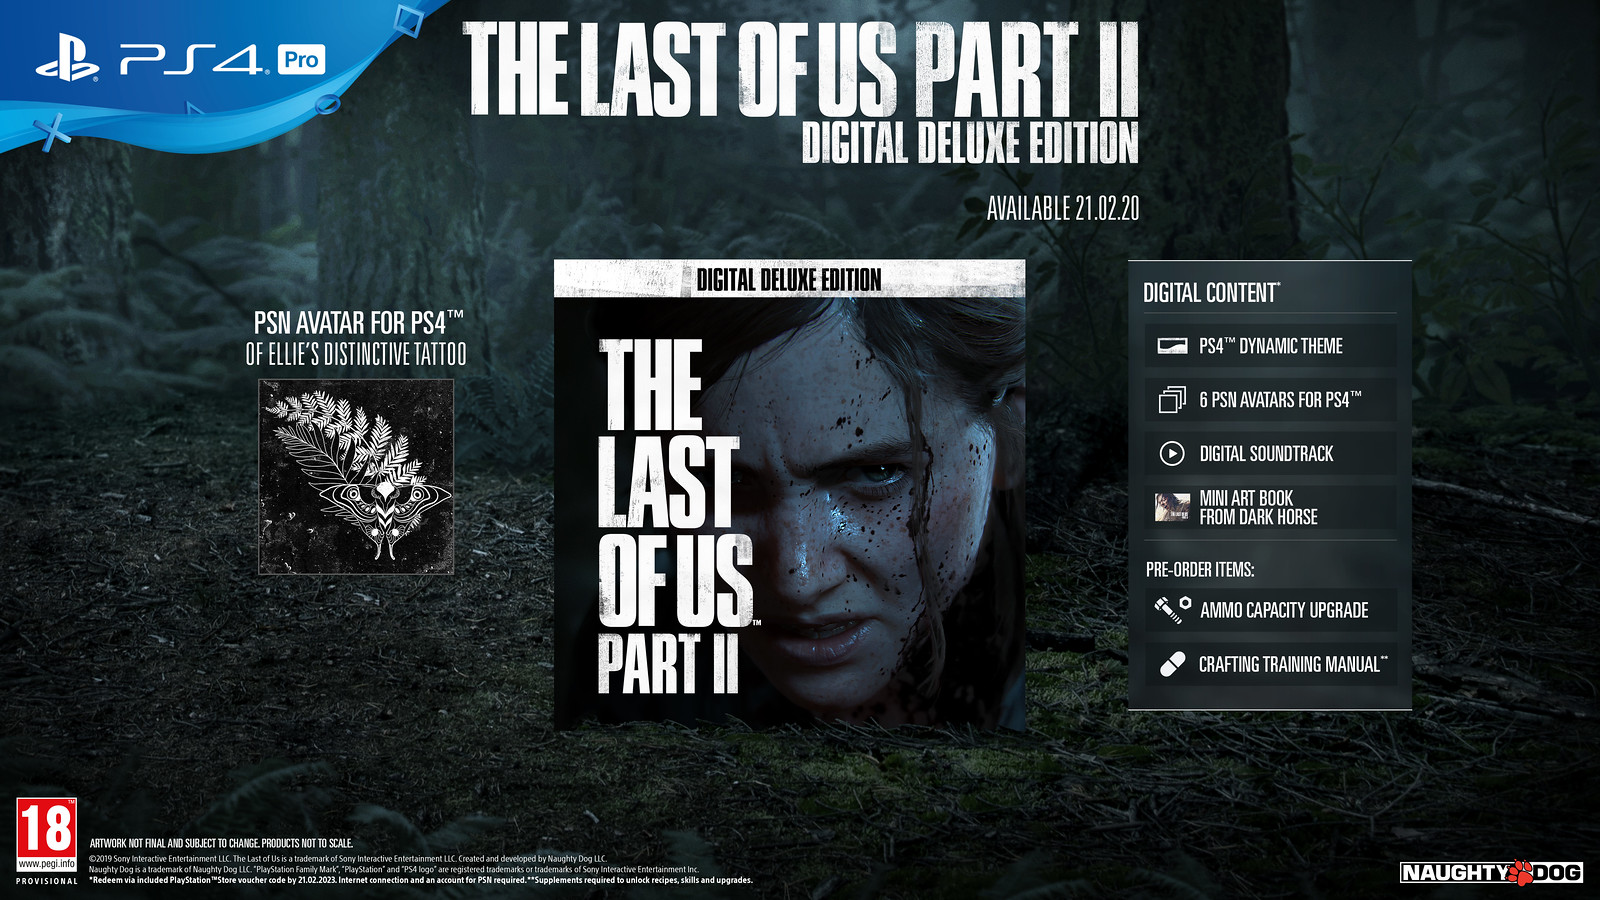 The Last of Us Part II Digital Deluxe Edition on PS4